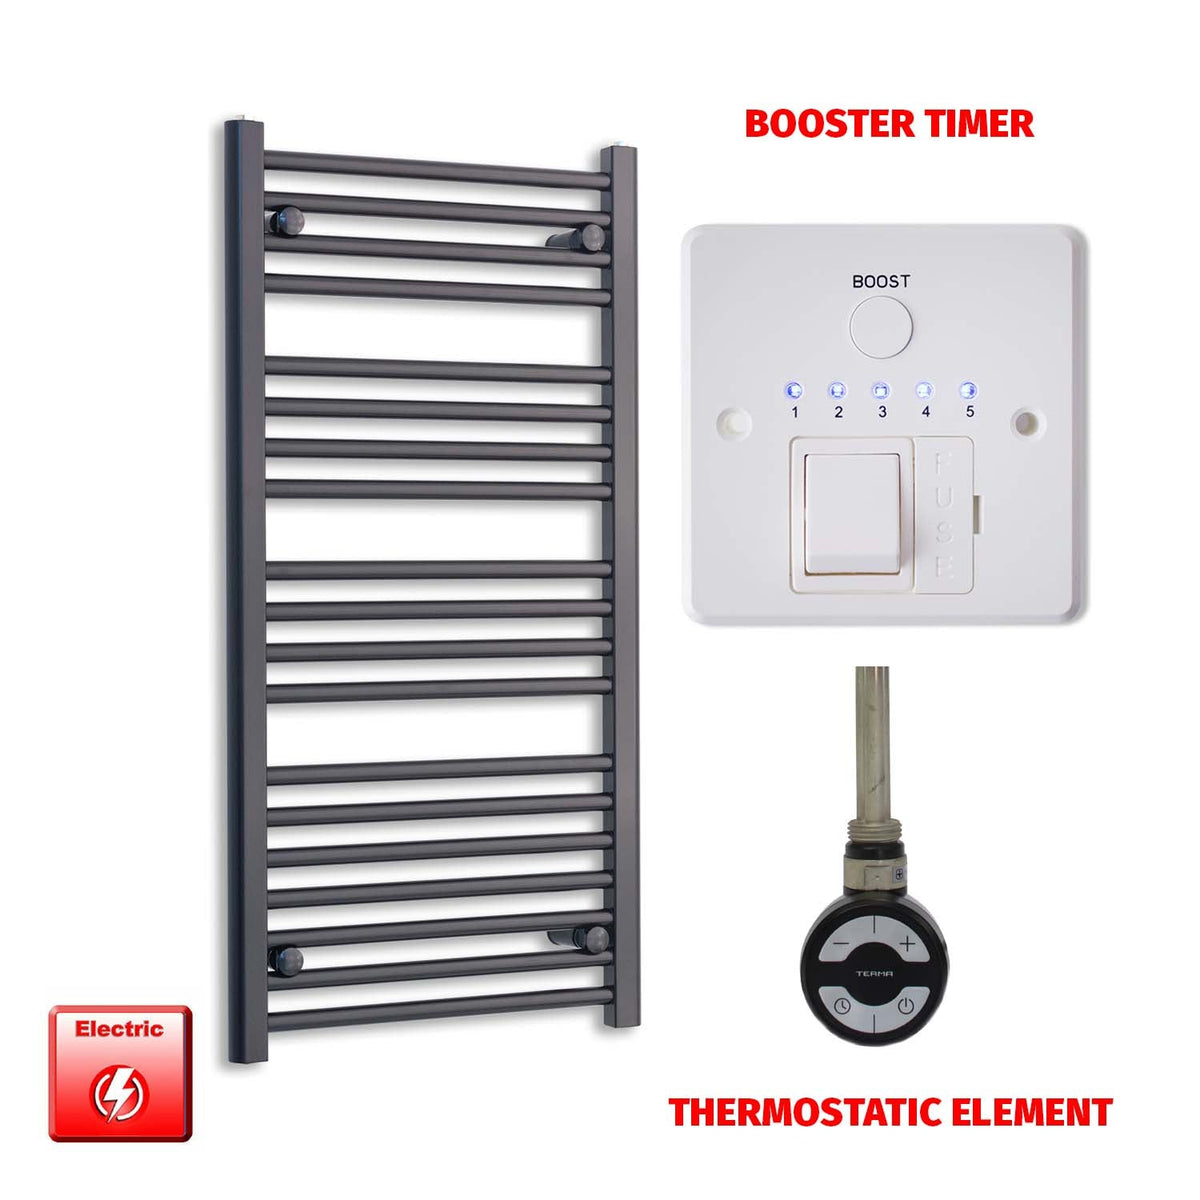 1000 x 550mm Wide Flat Black Pre-Filled Electric Heated Towel Radiator HTR MOA Thermostatic Booster Timer